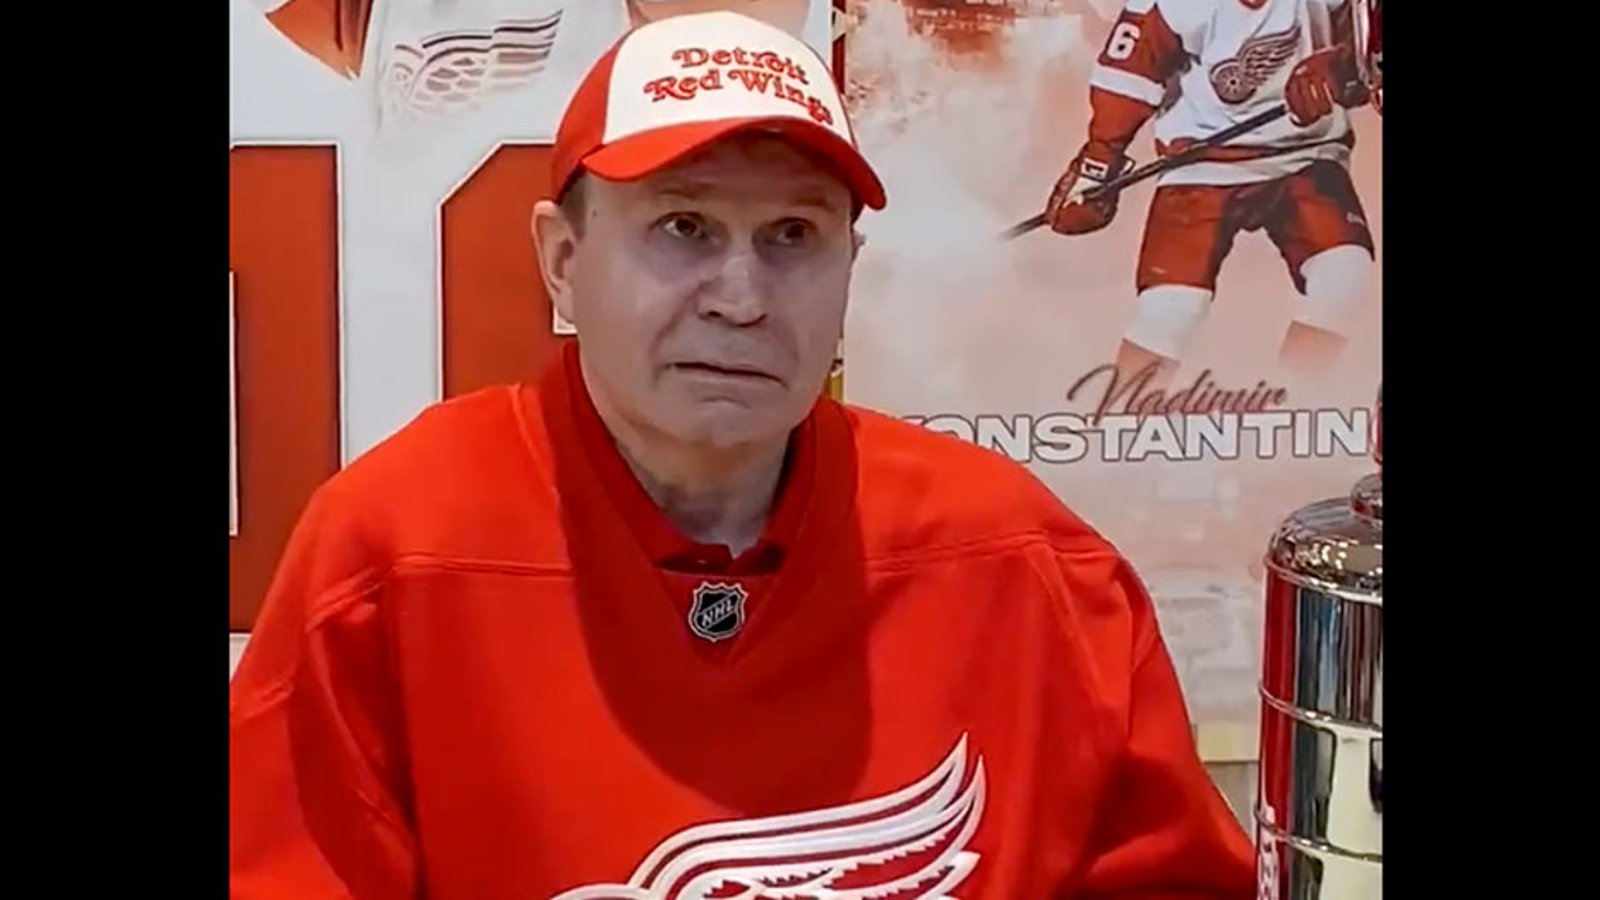 Vladimir Konstantinov names his candidate for best Red Wings player 